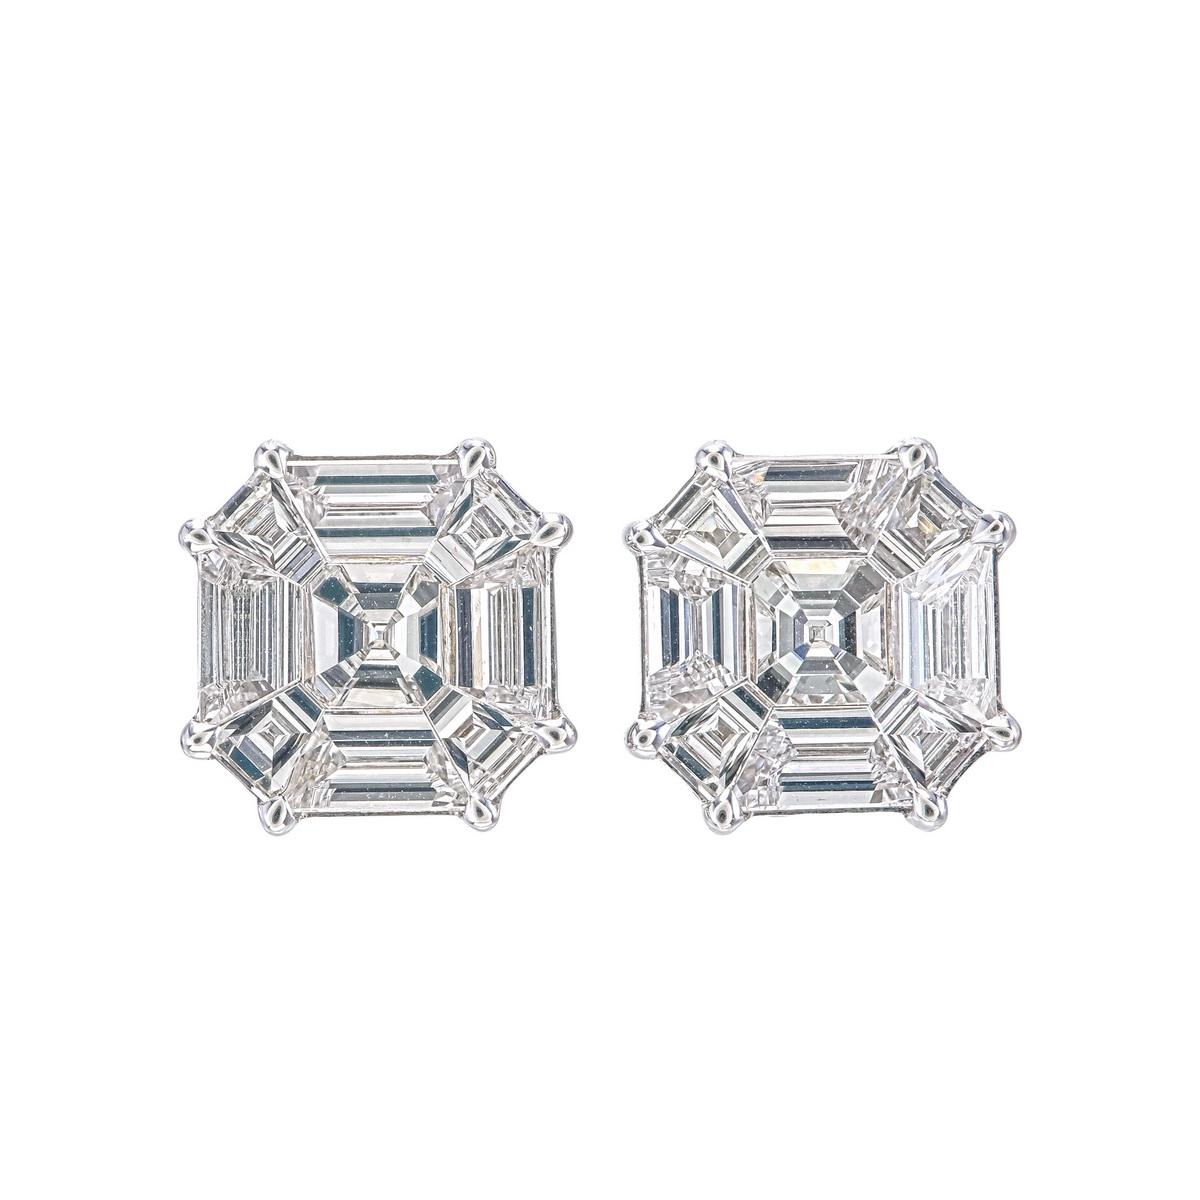 This pair of earrings is made with 3.60 carat diamonds in composite setting giving a look of 10+ carat pair.
Each diamond is cut & polished to customize & form a ASSCHER cut diamond shape after setting. 
The backs are diamond studded adding beauty